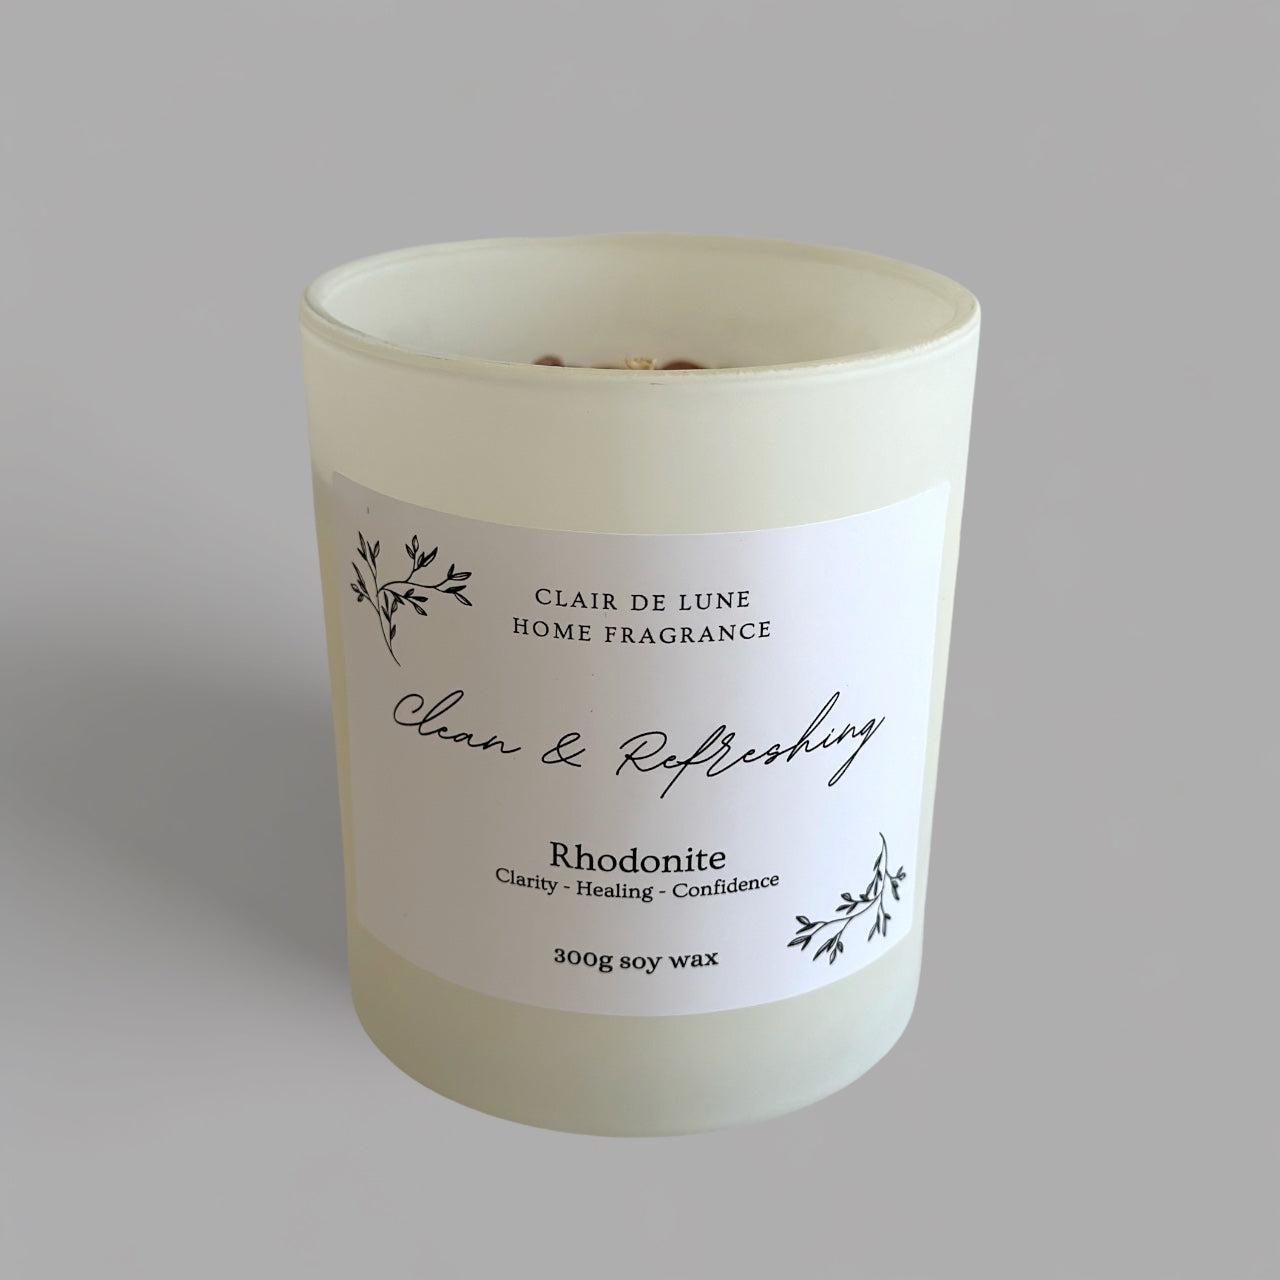 Clean & refreshing candle